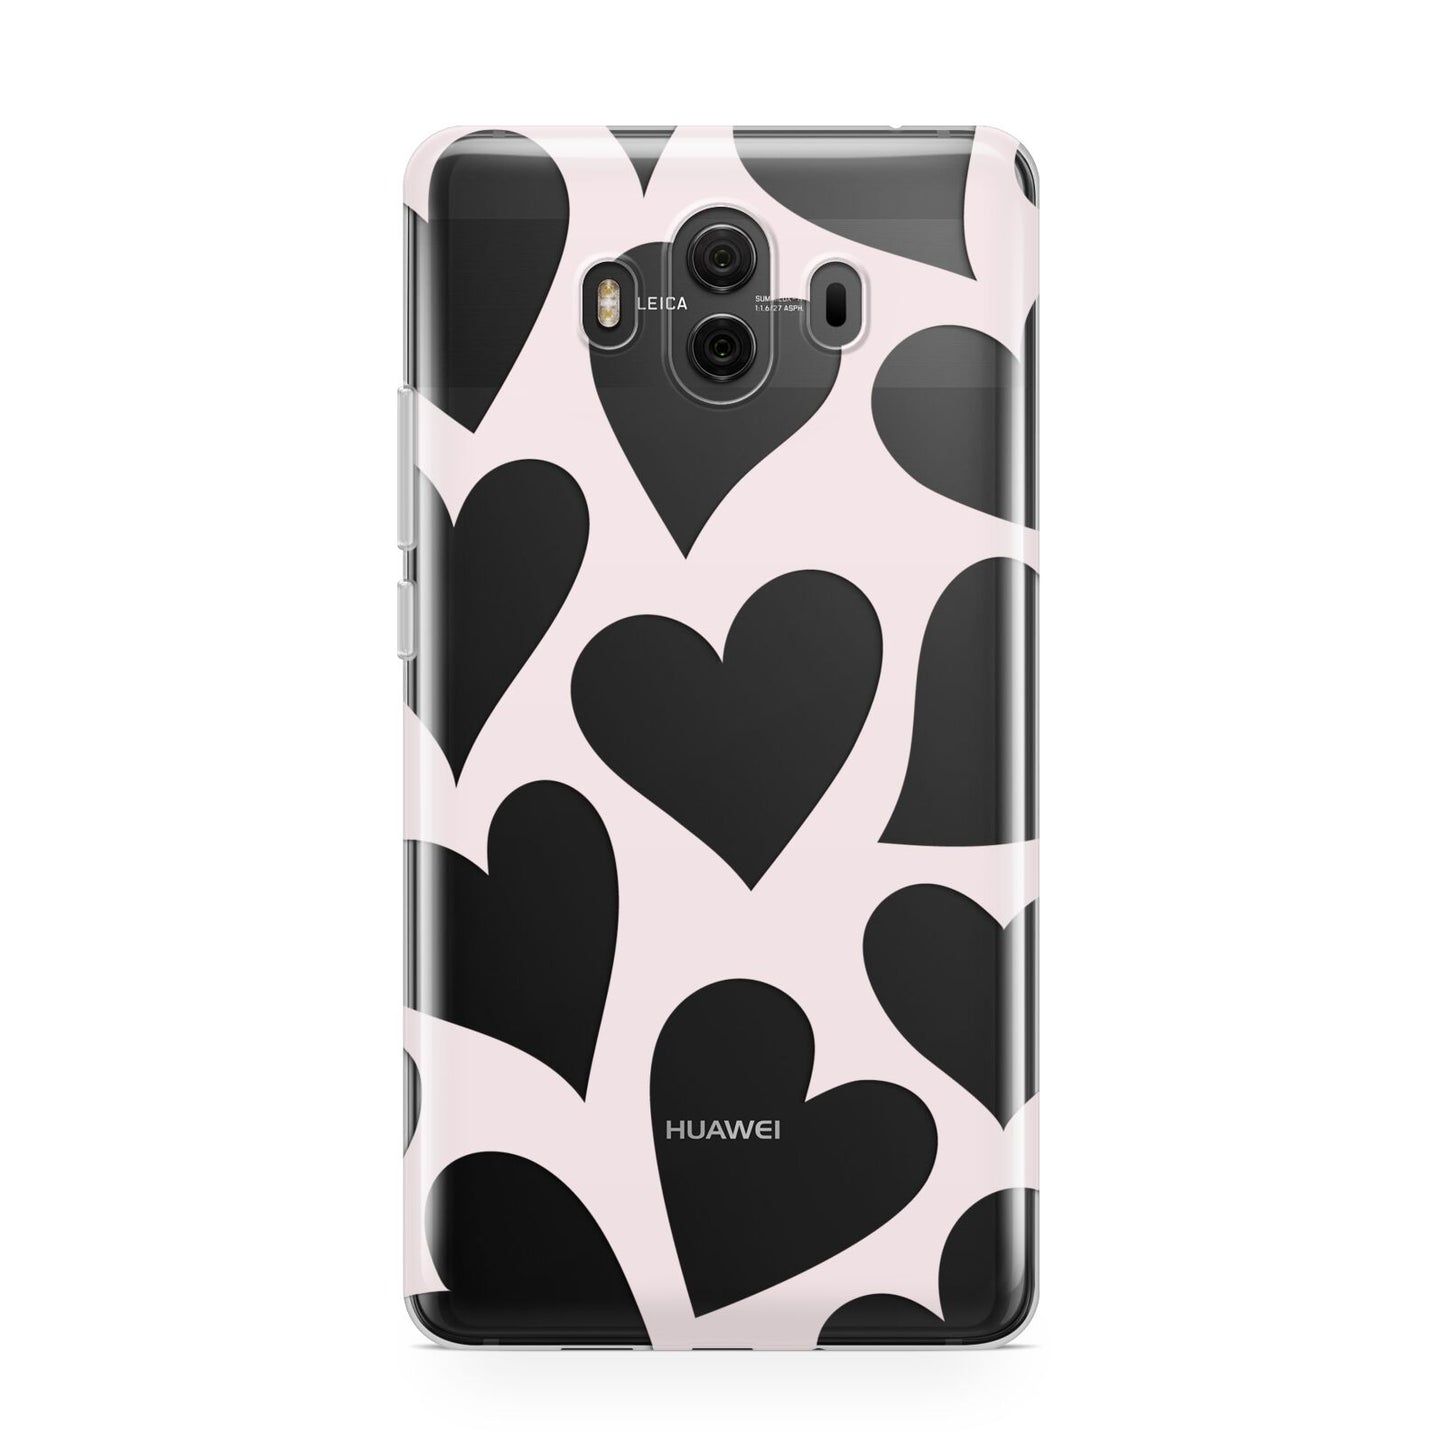 Heart Huawei Mate 10 Protective Phone Case